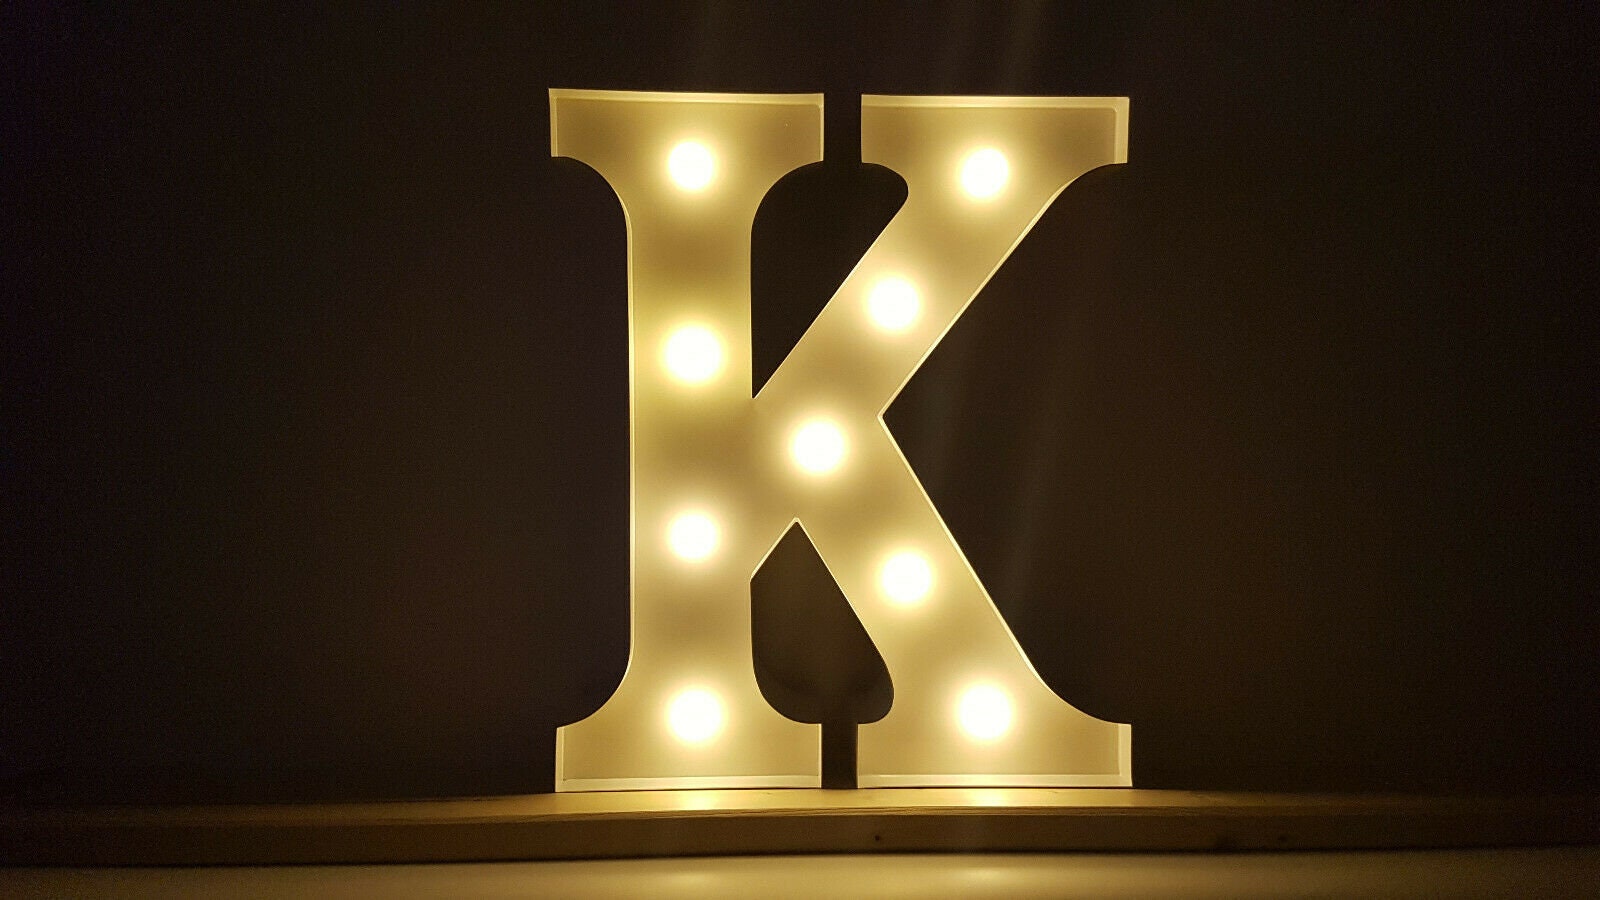 Gold Metallic Paper Mache Letters Numbers Small Large Wall and